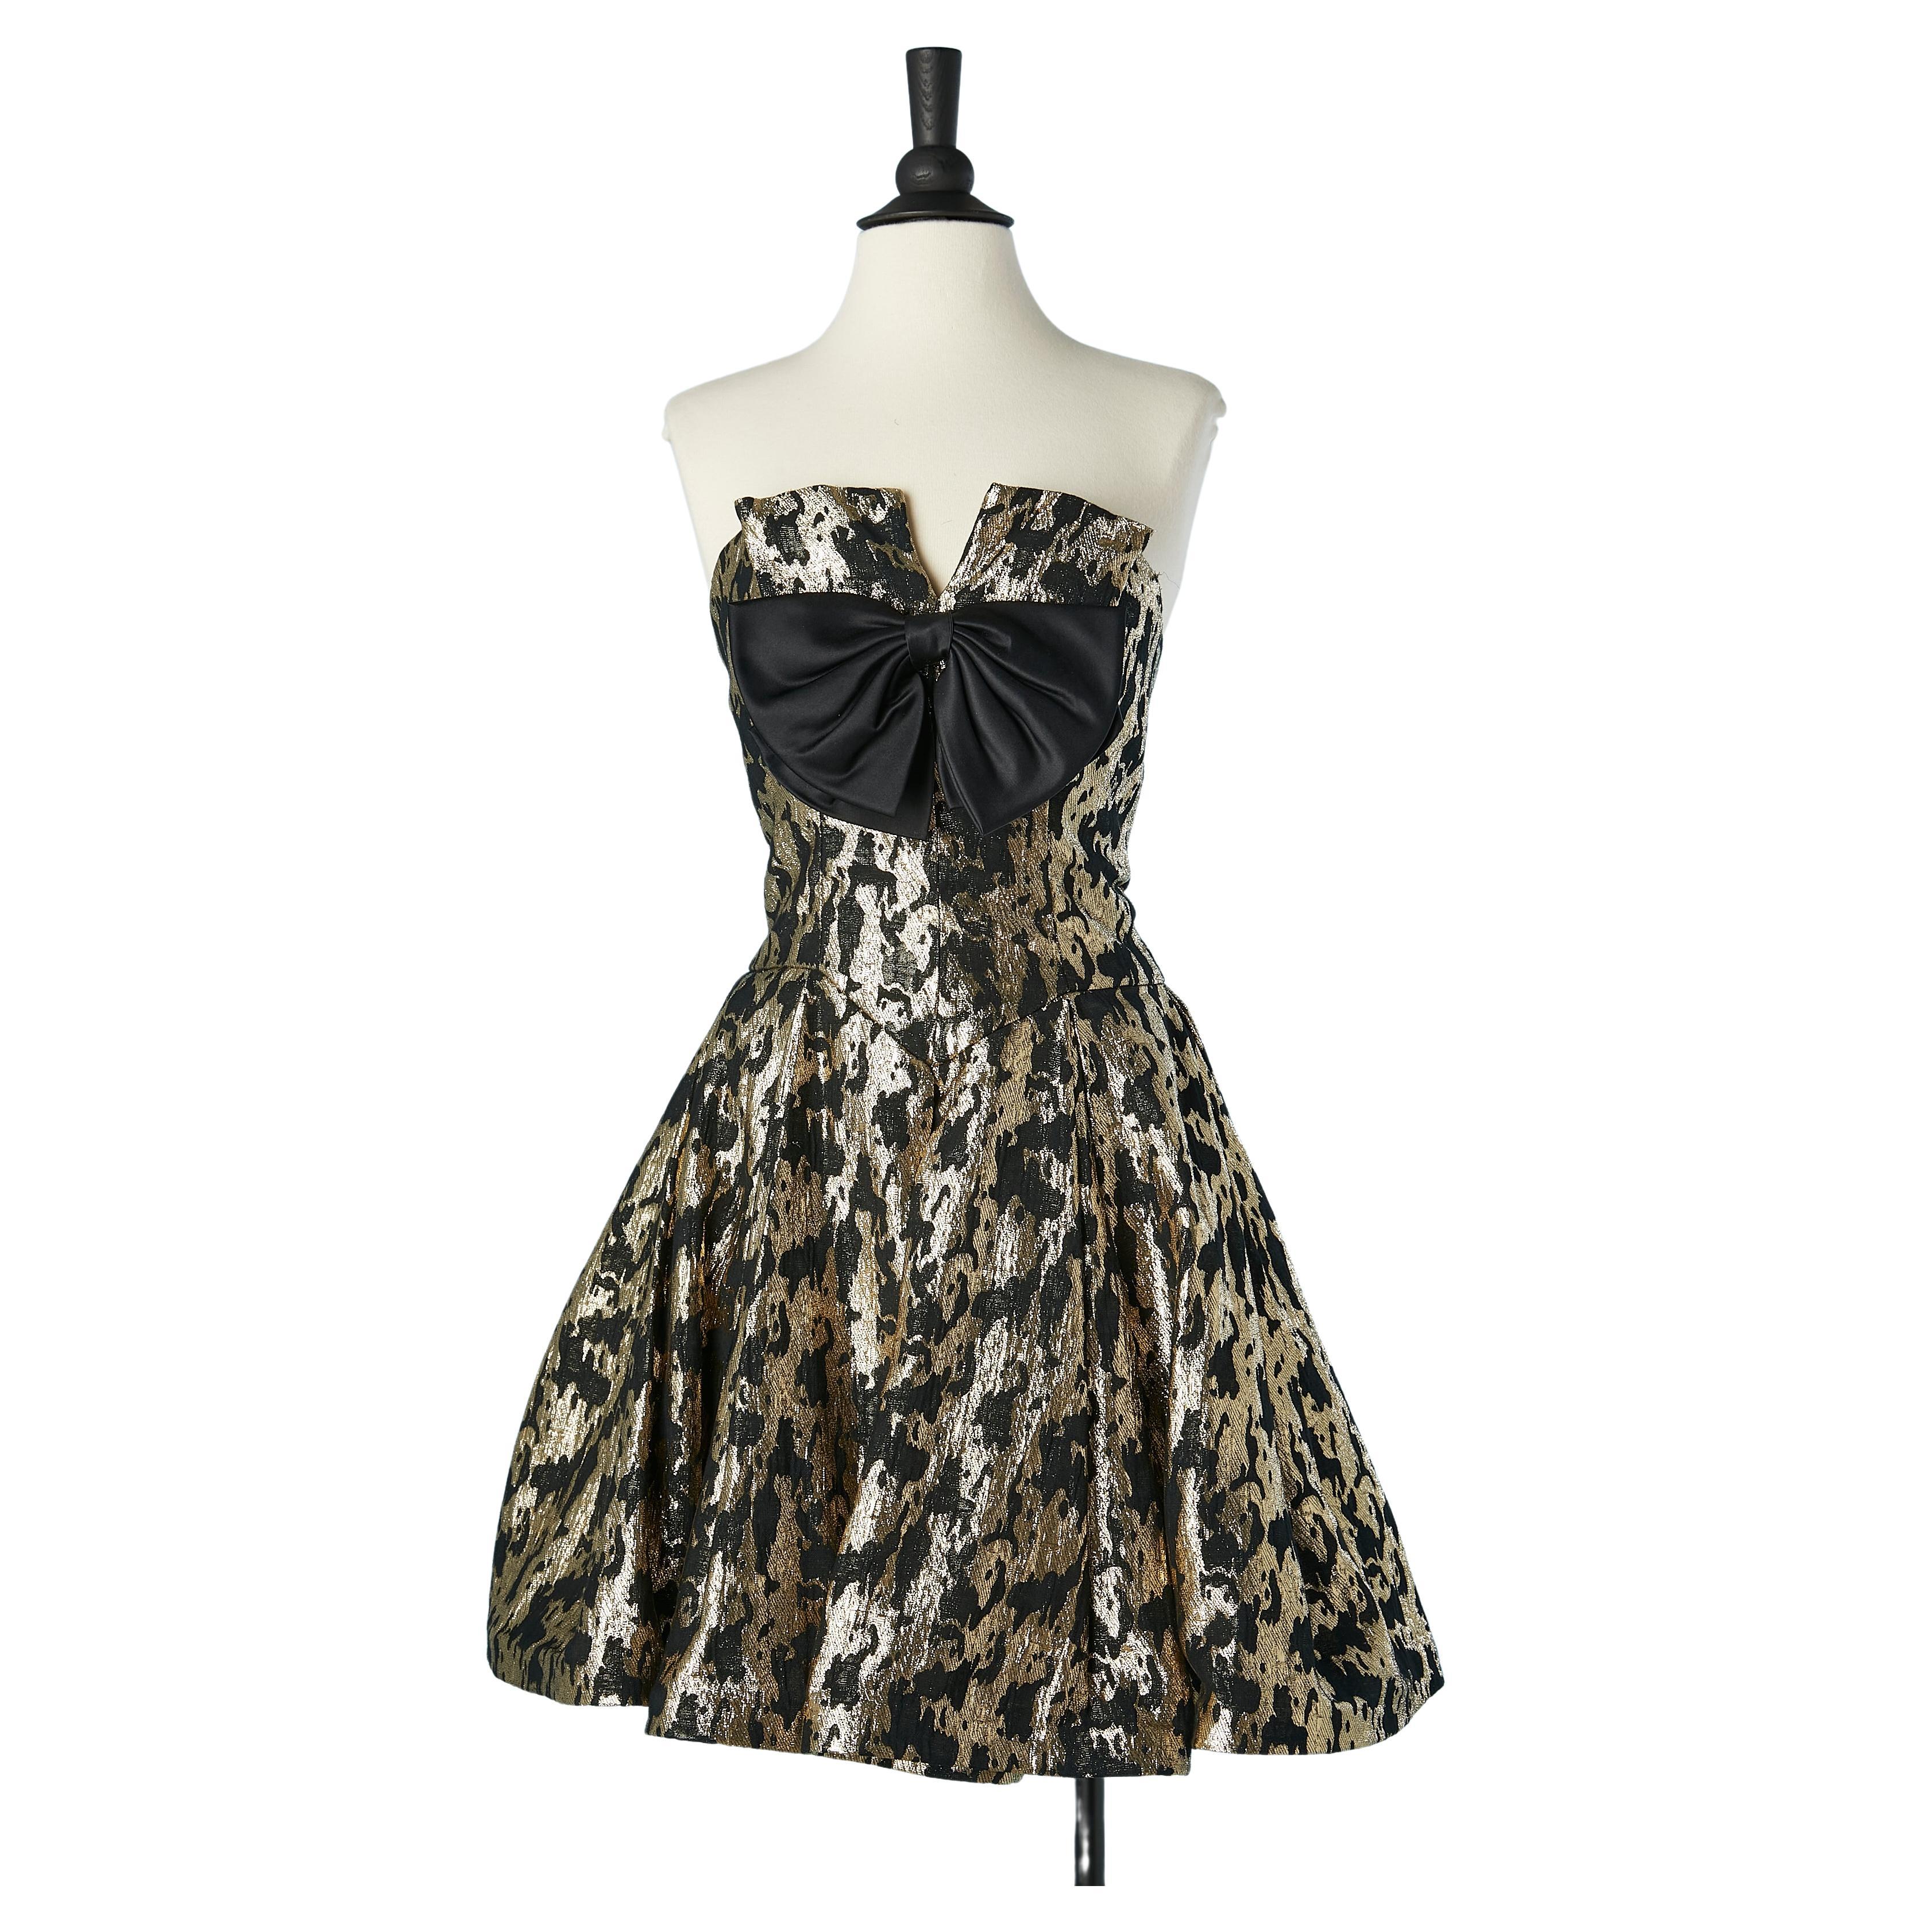  Gold and black brocade bustier cocktail dress MIGNON Anne-Marie Gabalis NY  For Sale